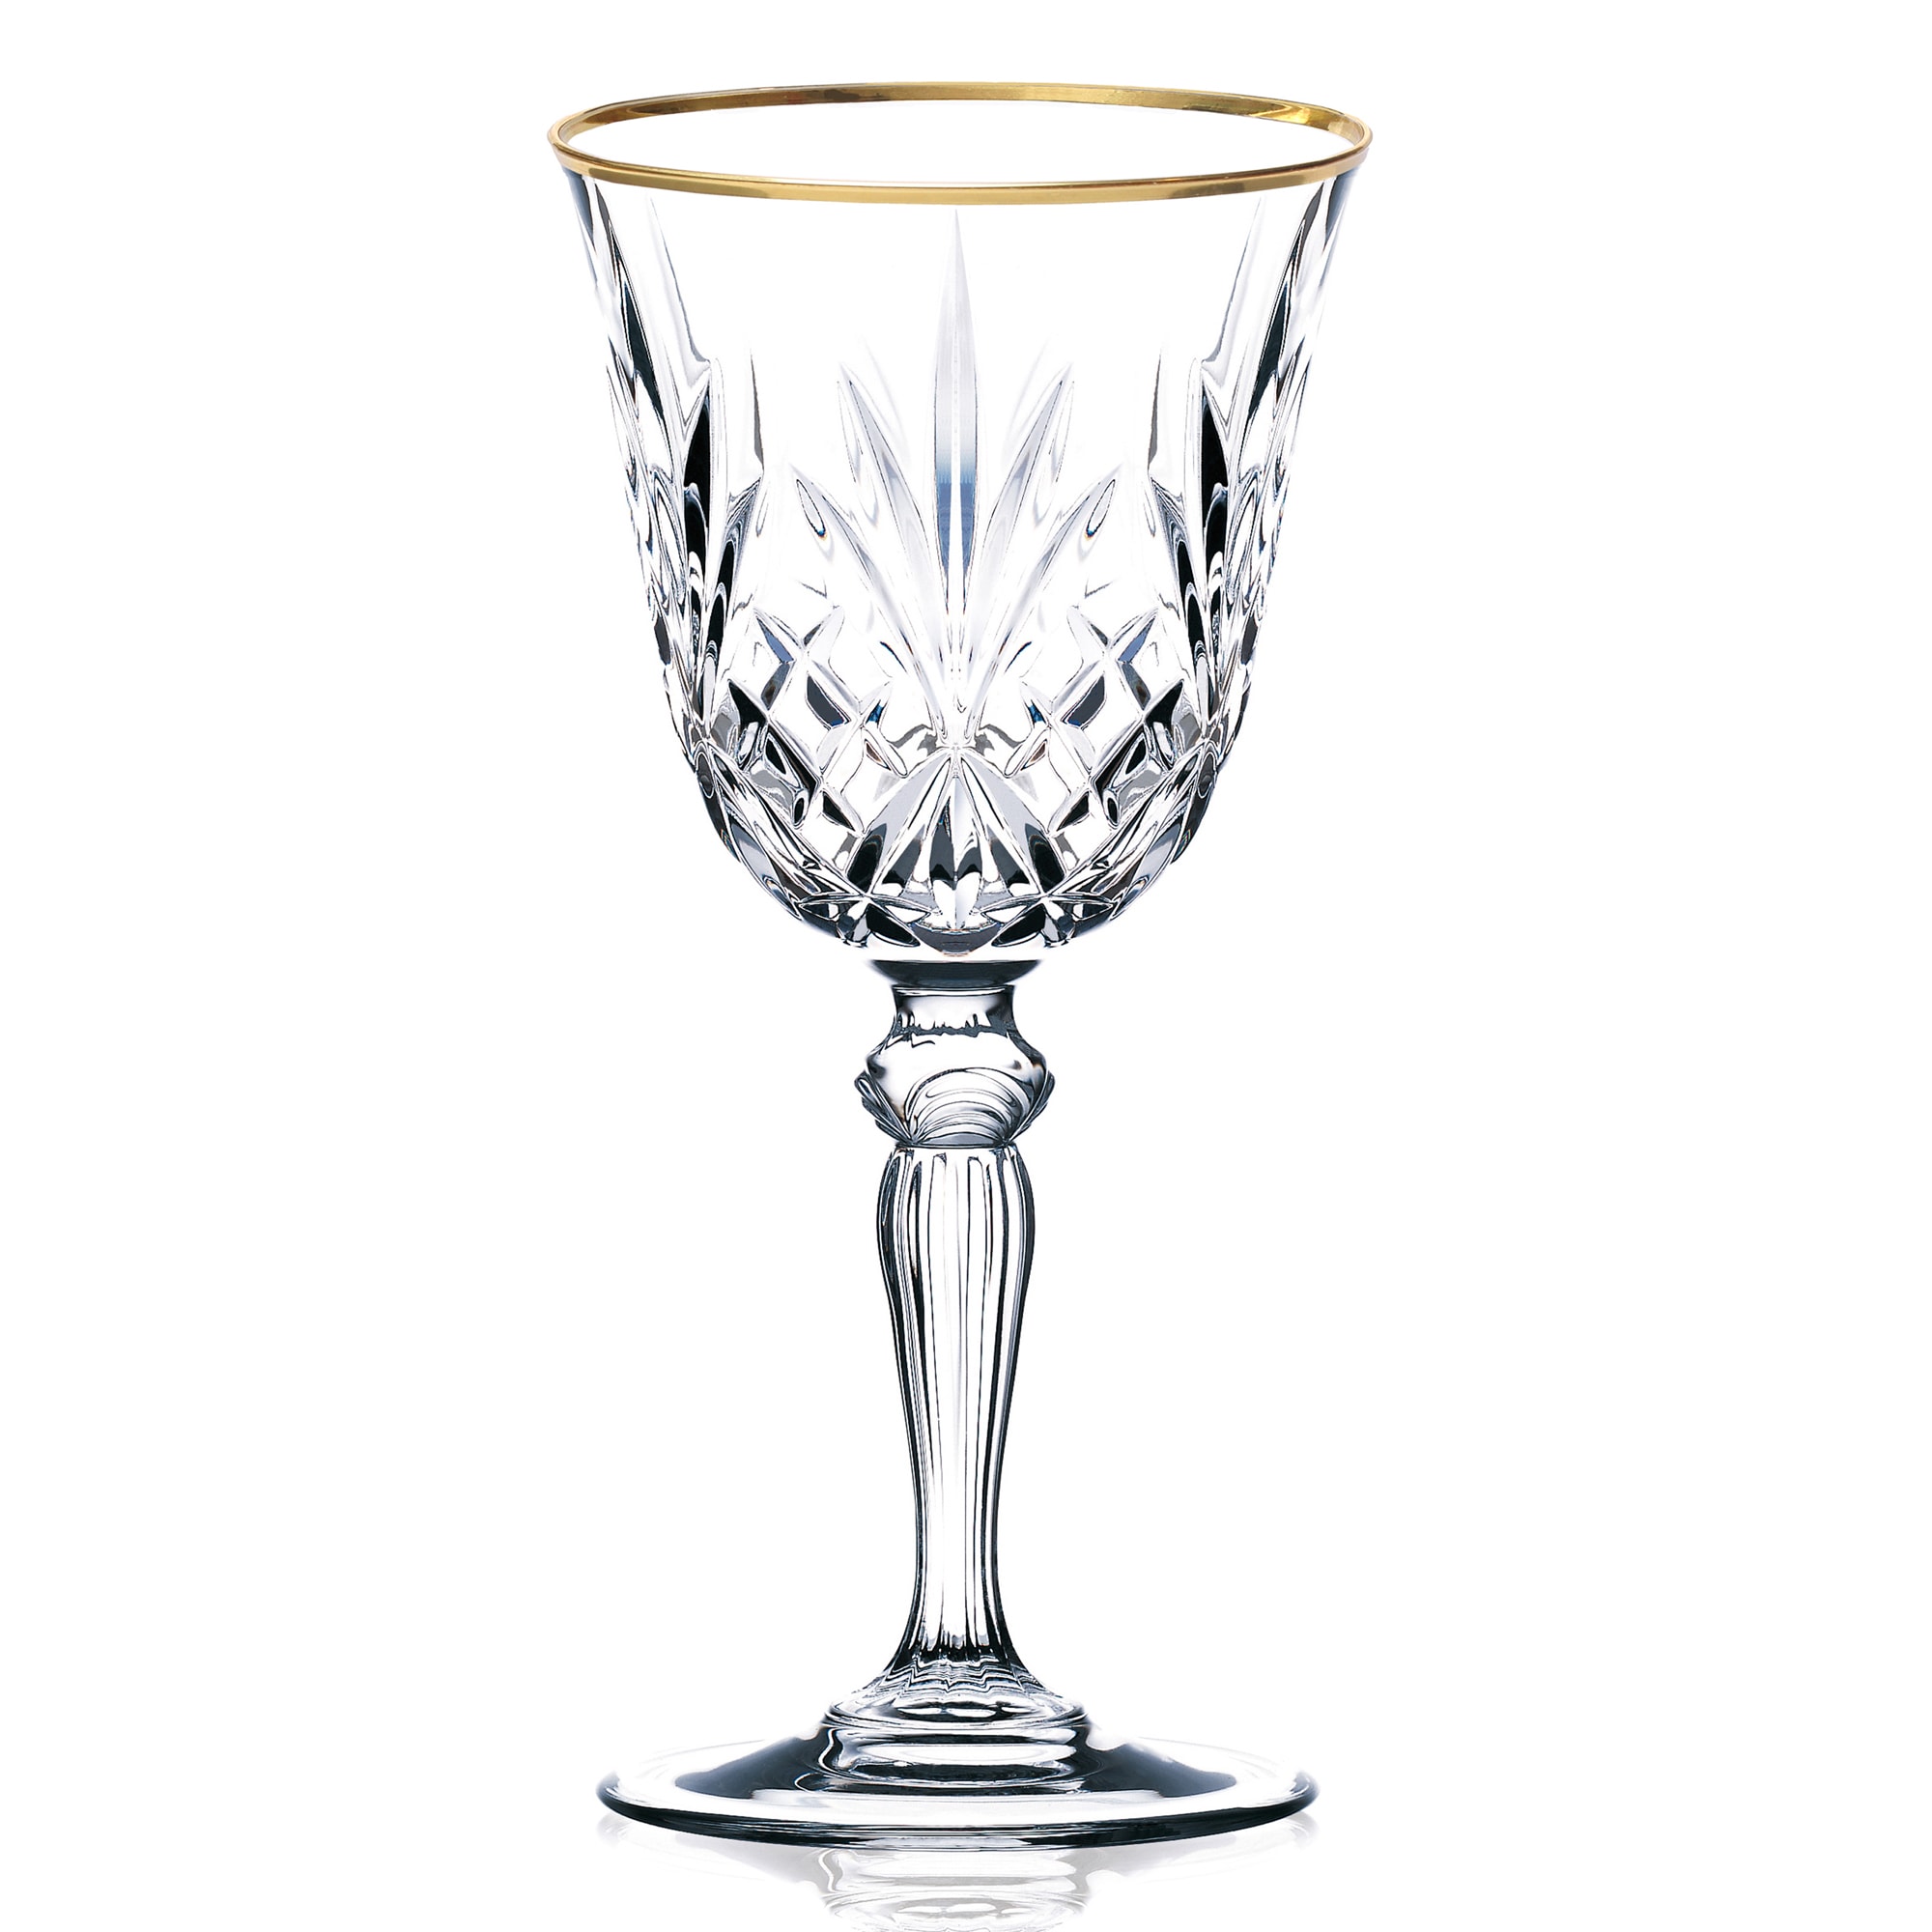 https://ak1.ostkcdn.com/images/products/9204274/Siena-Collection-Set-of-4-Crystal-Red-Wine-Glass-with-gold-band-design-by-Lorren-Home-Trends-05285acb-50e0-4b58-8ebe-c50887b40dad.jpg